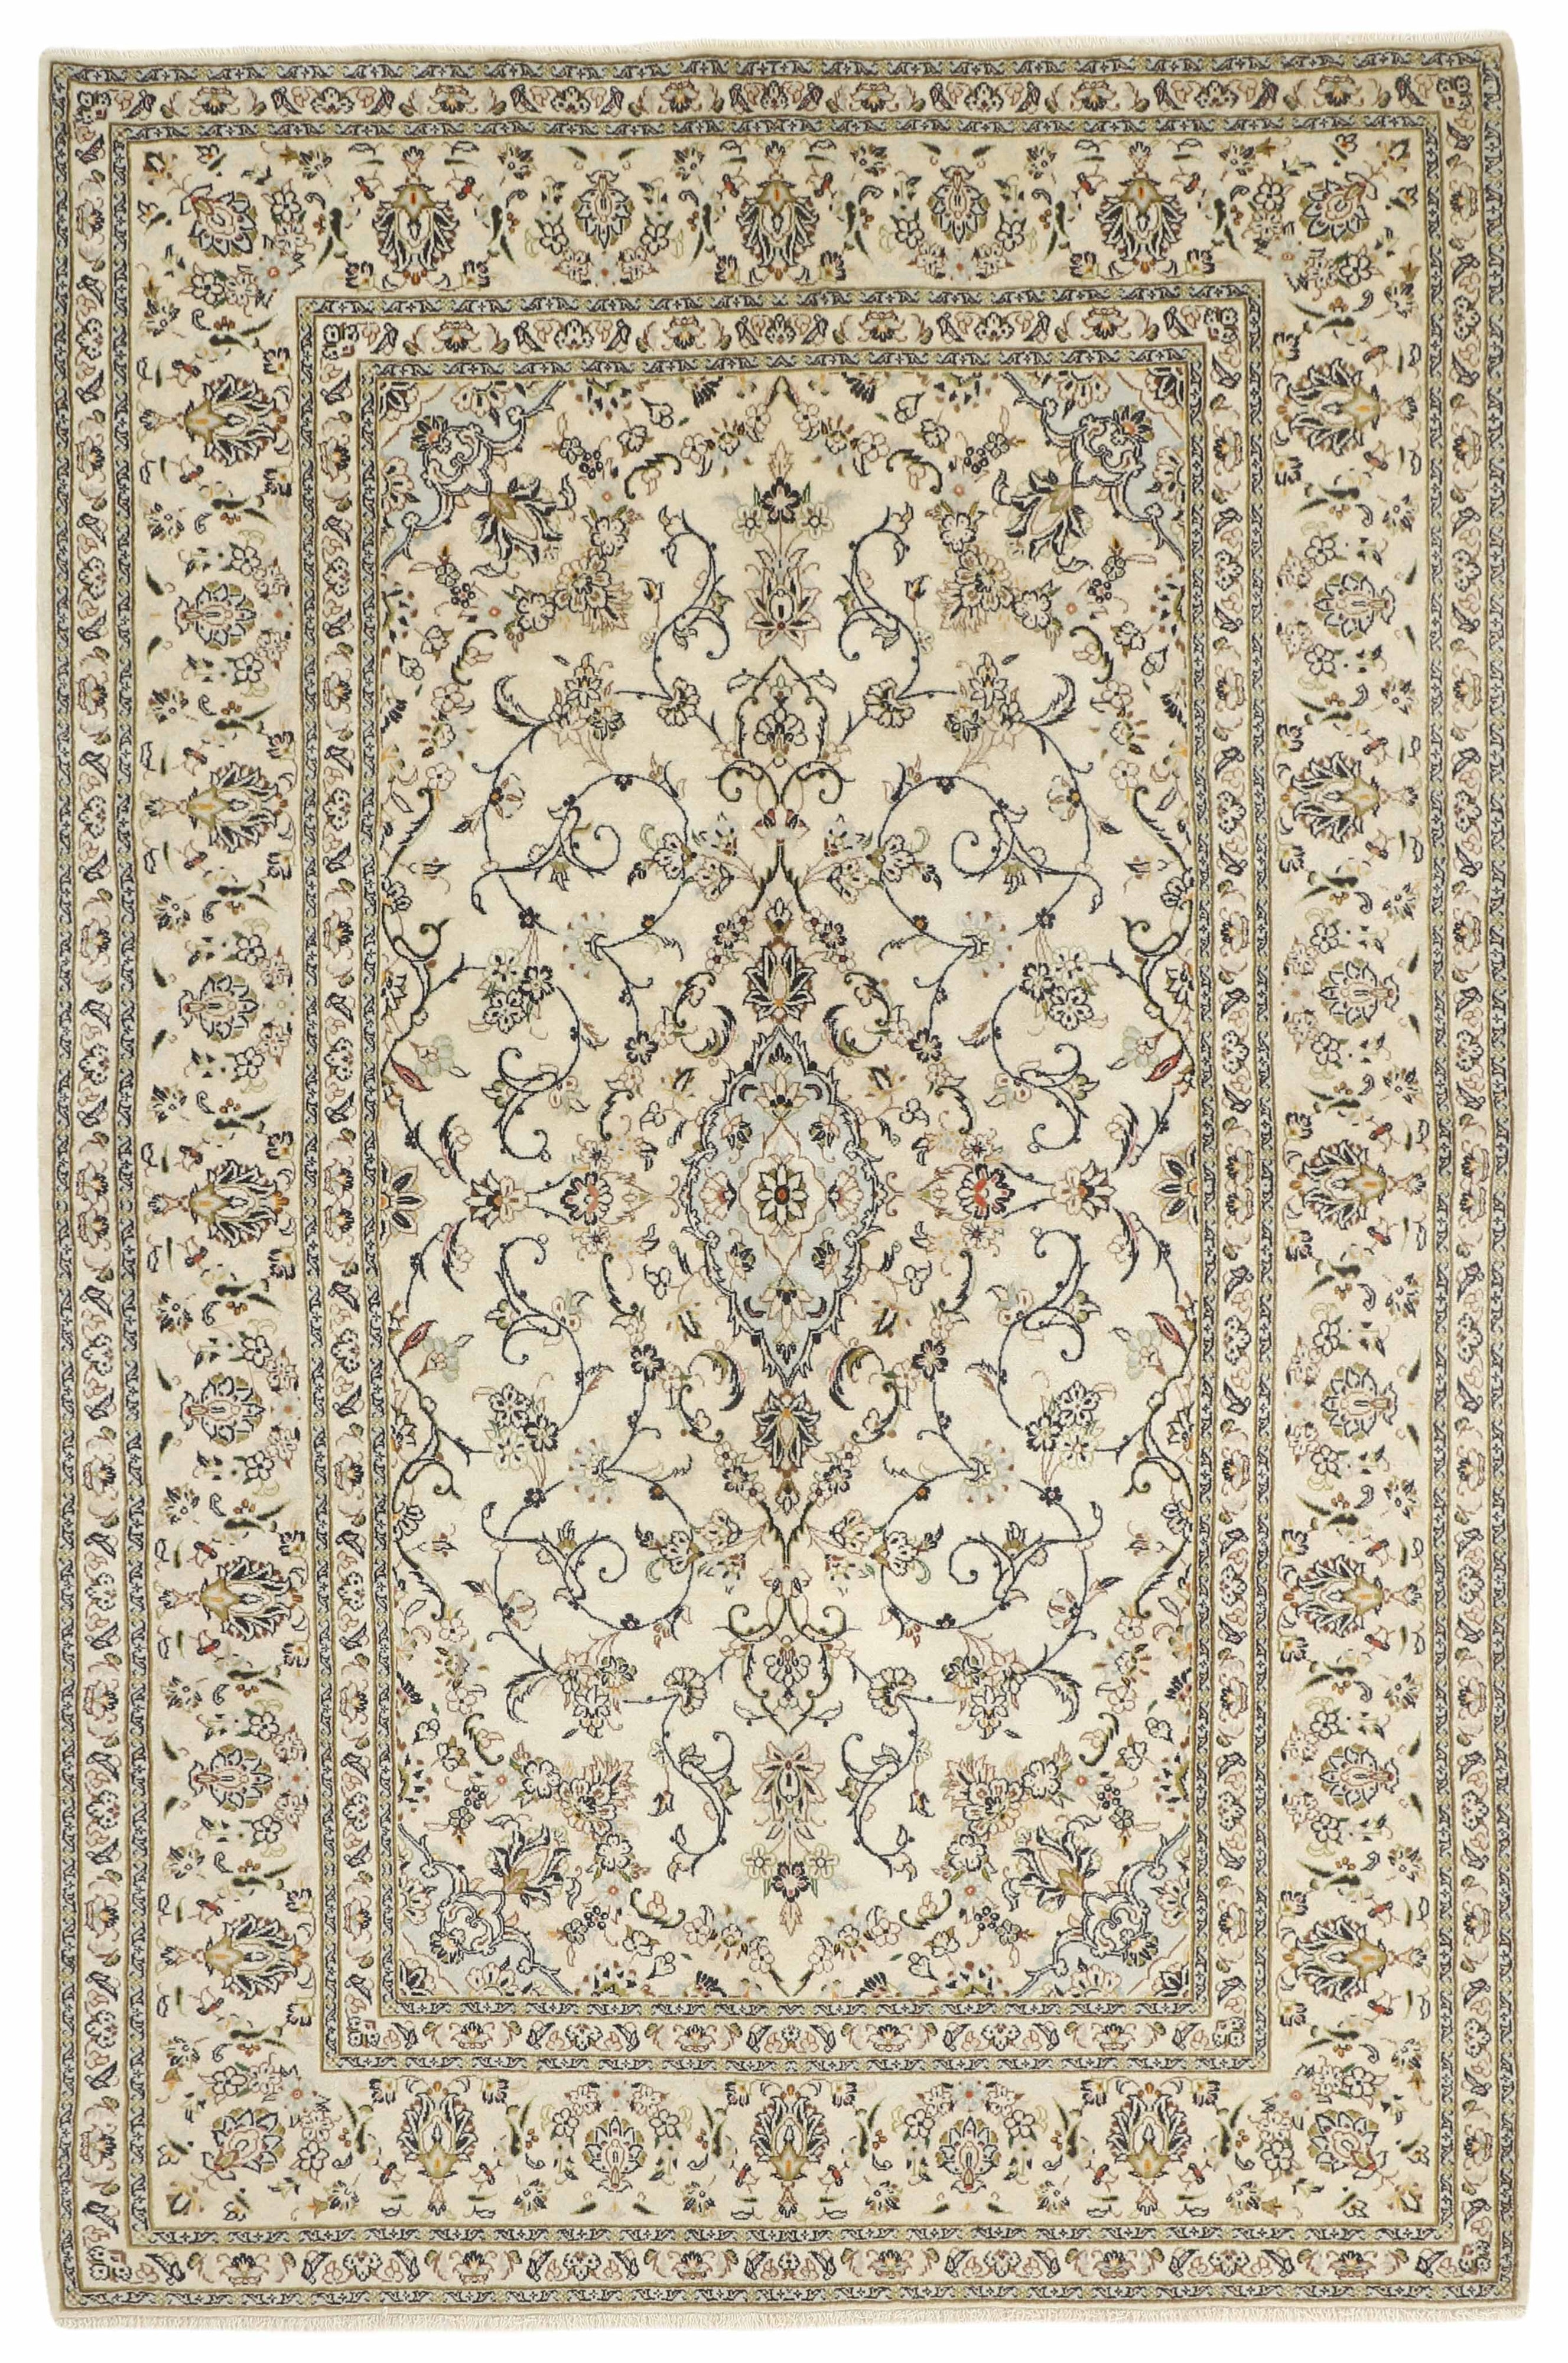 Authentic persian rug with traditional floral design in beige